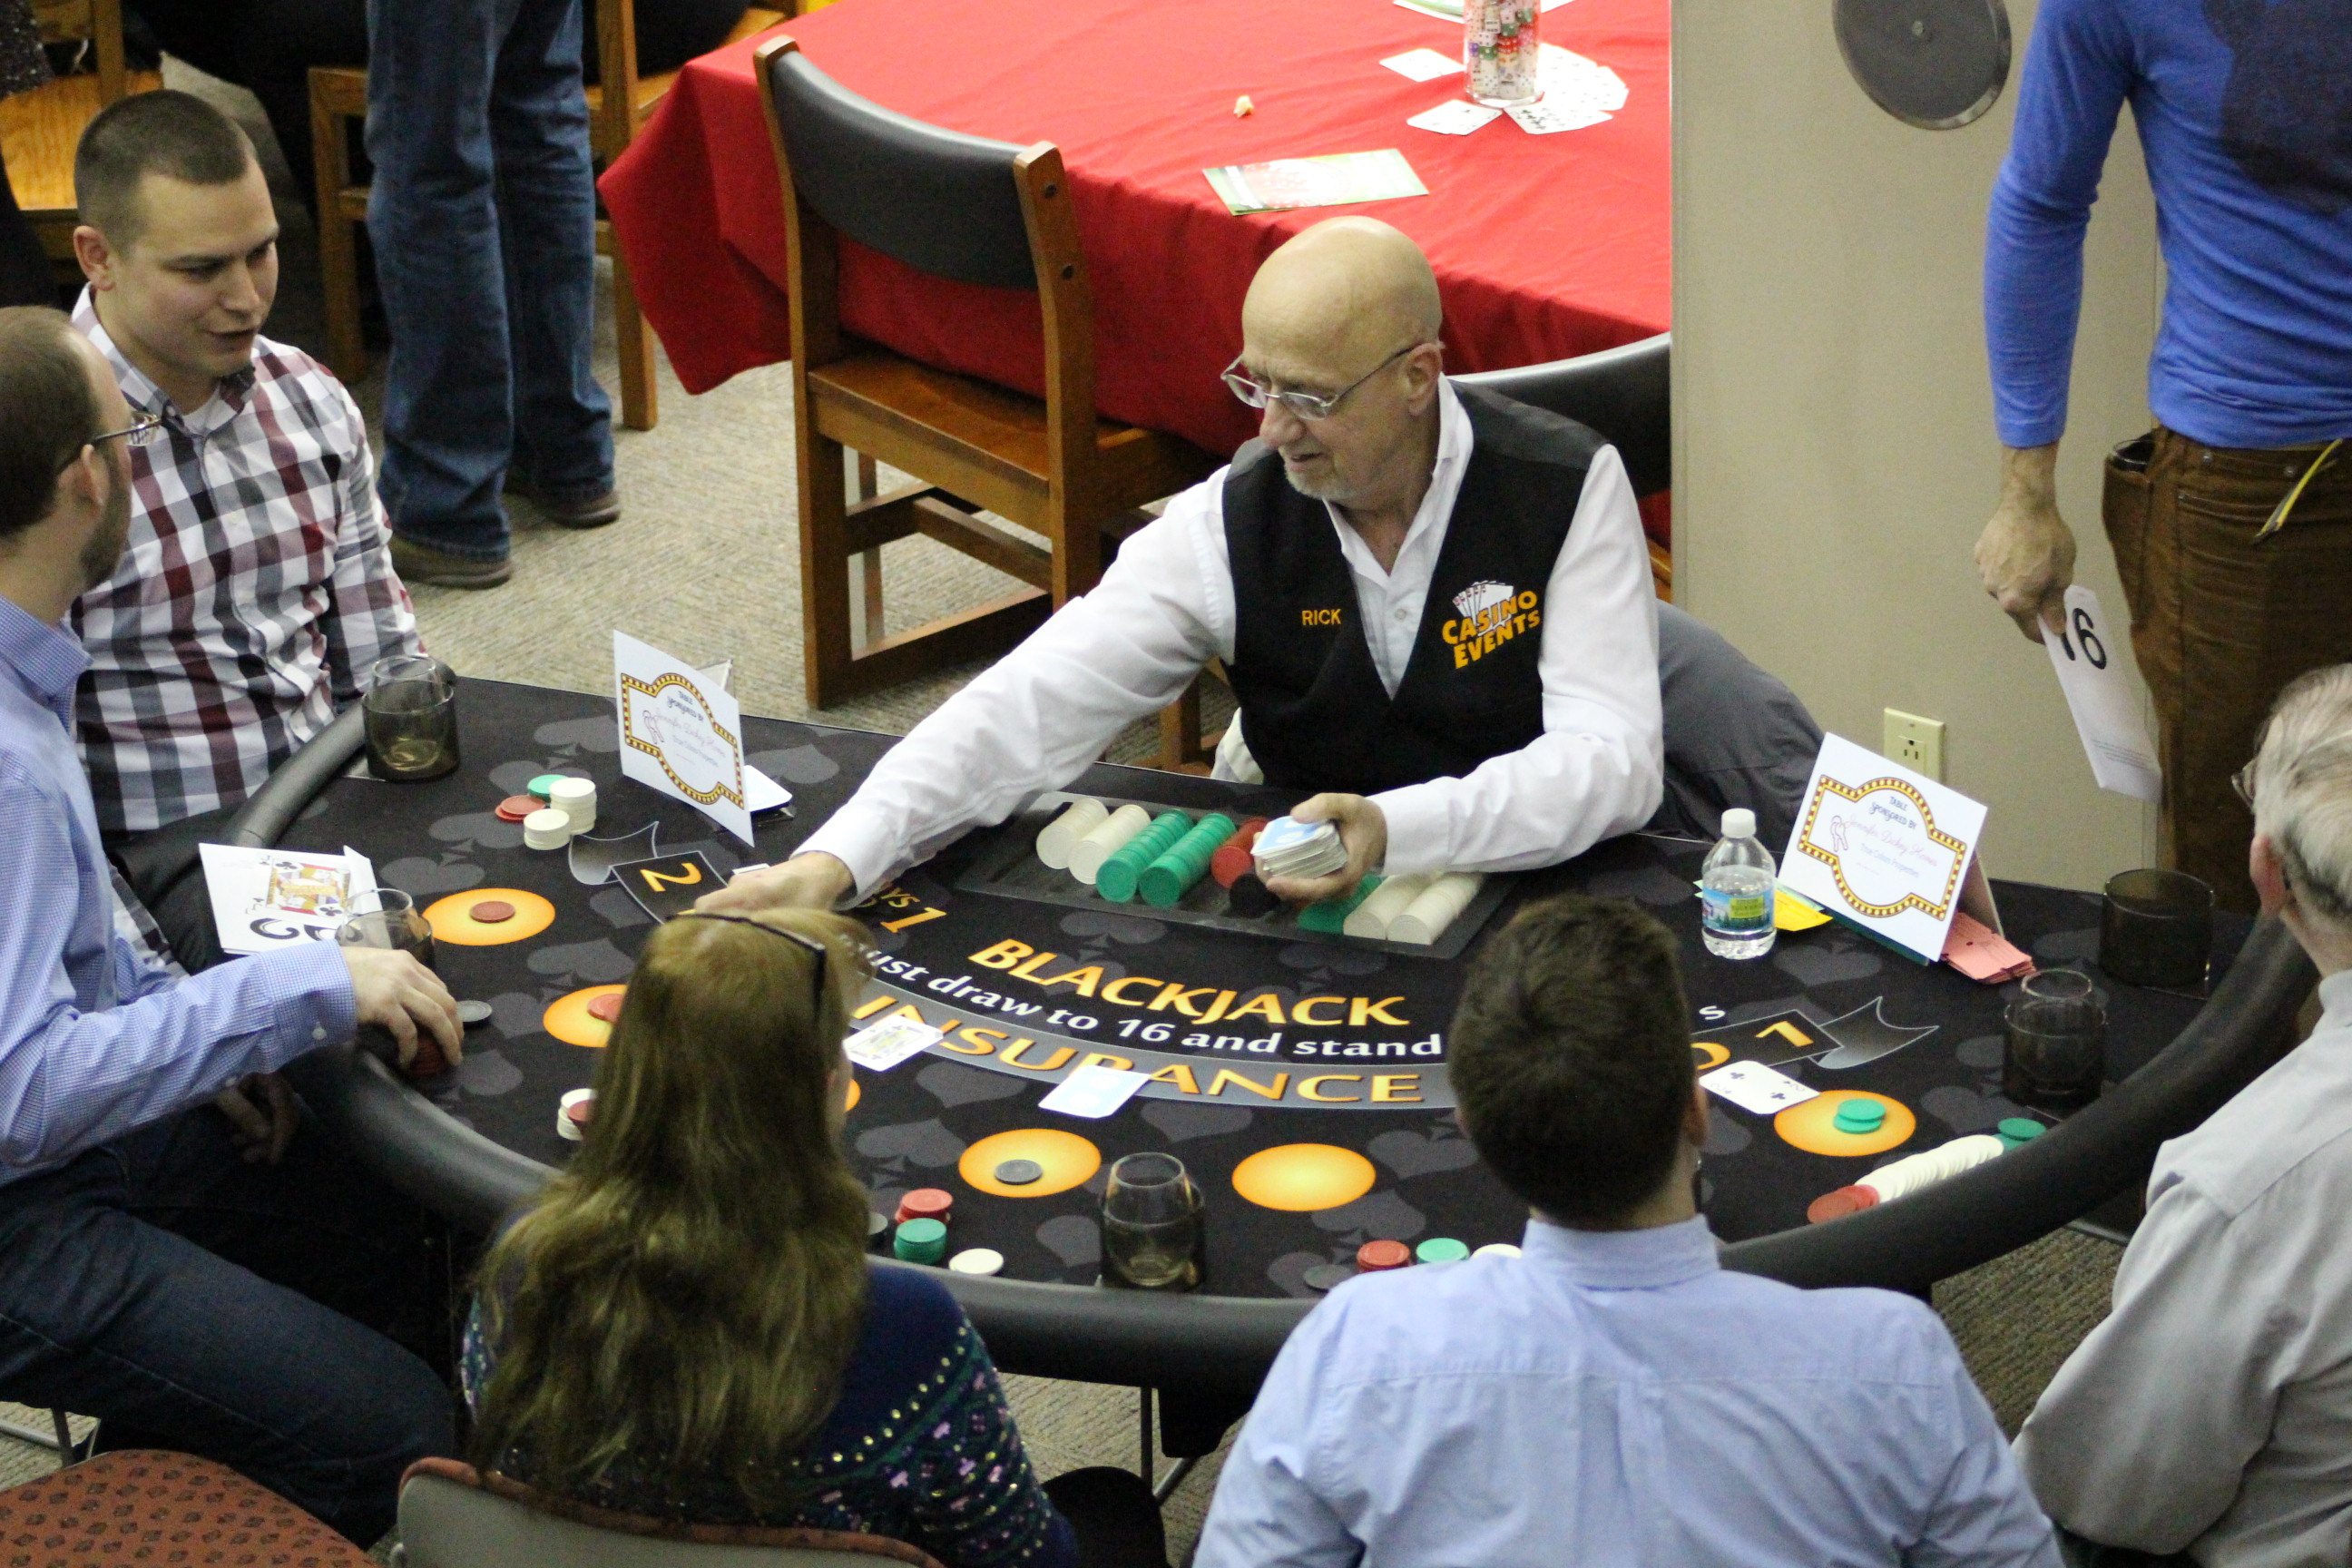 Dealer and players at a blackjack table